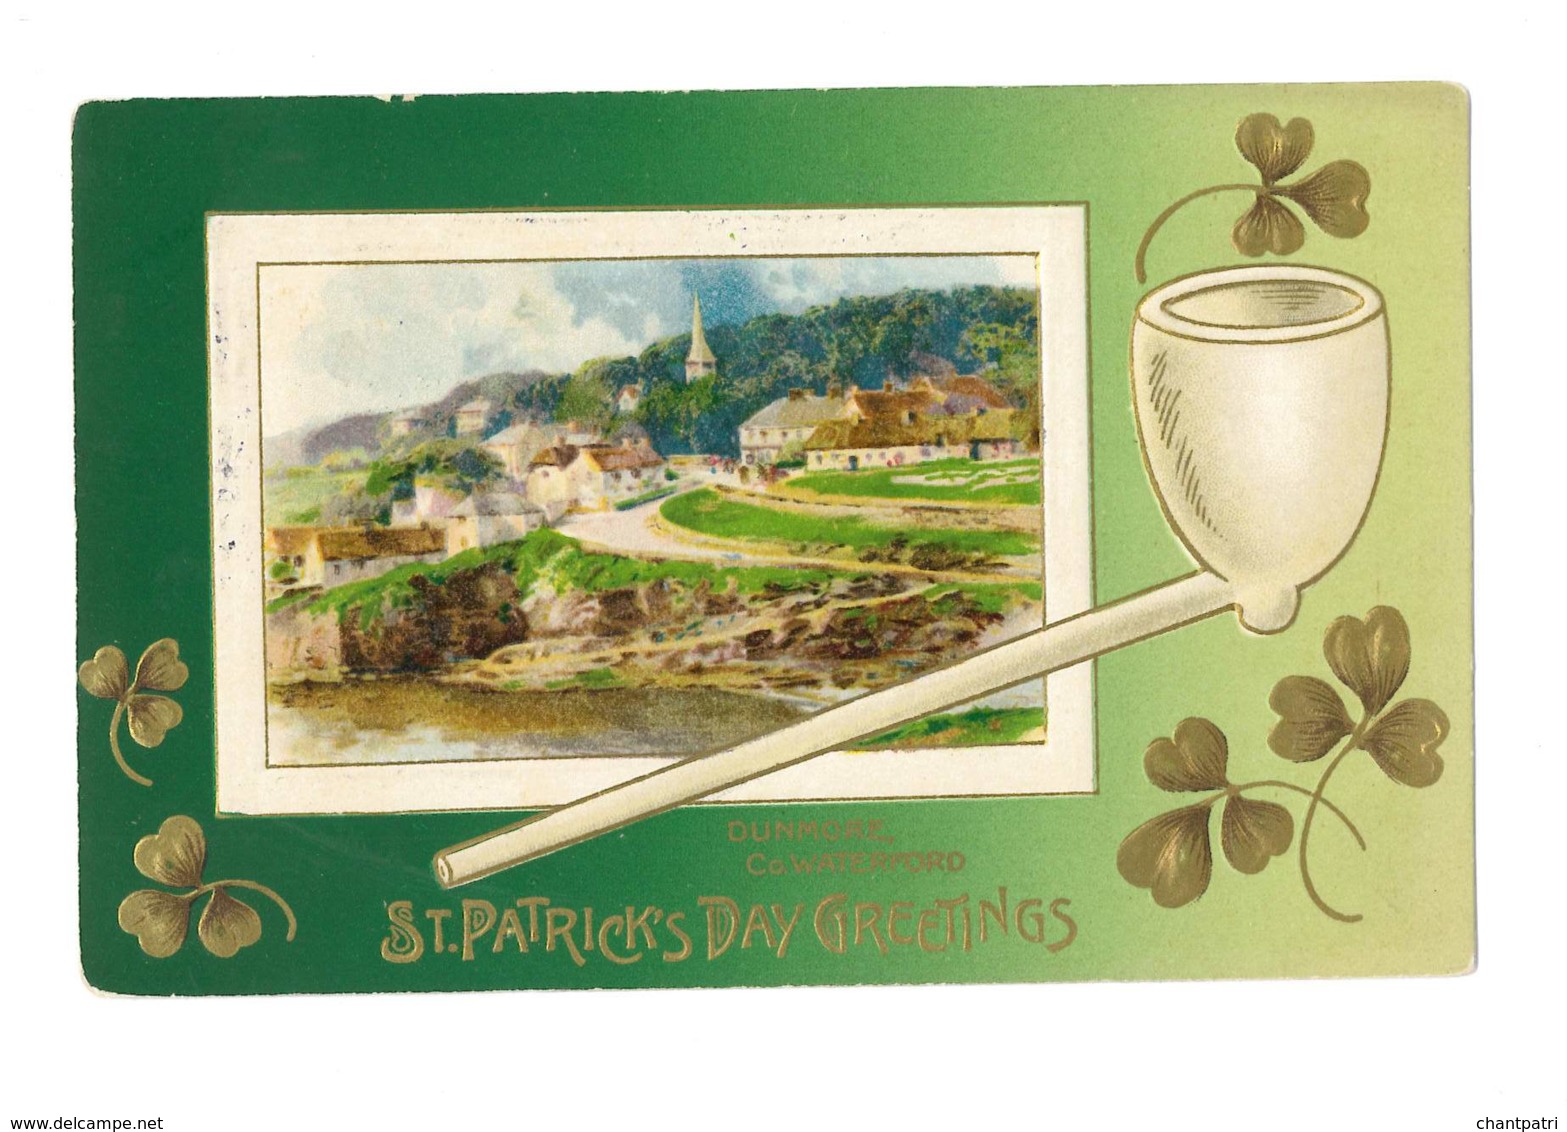 St Patrick's Day Greetings - Dunmore Co Waterford - Pipe Et Trèfles - Gaufrée - Scan Recto/Verso - 6002 - Saint-Patrick's Day